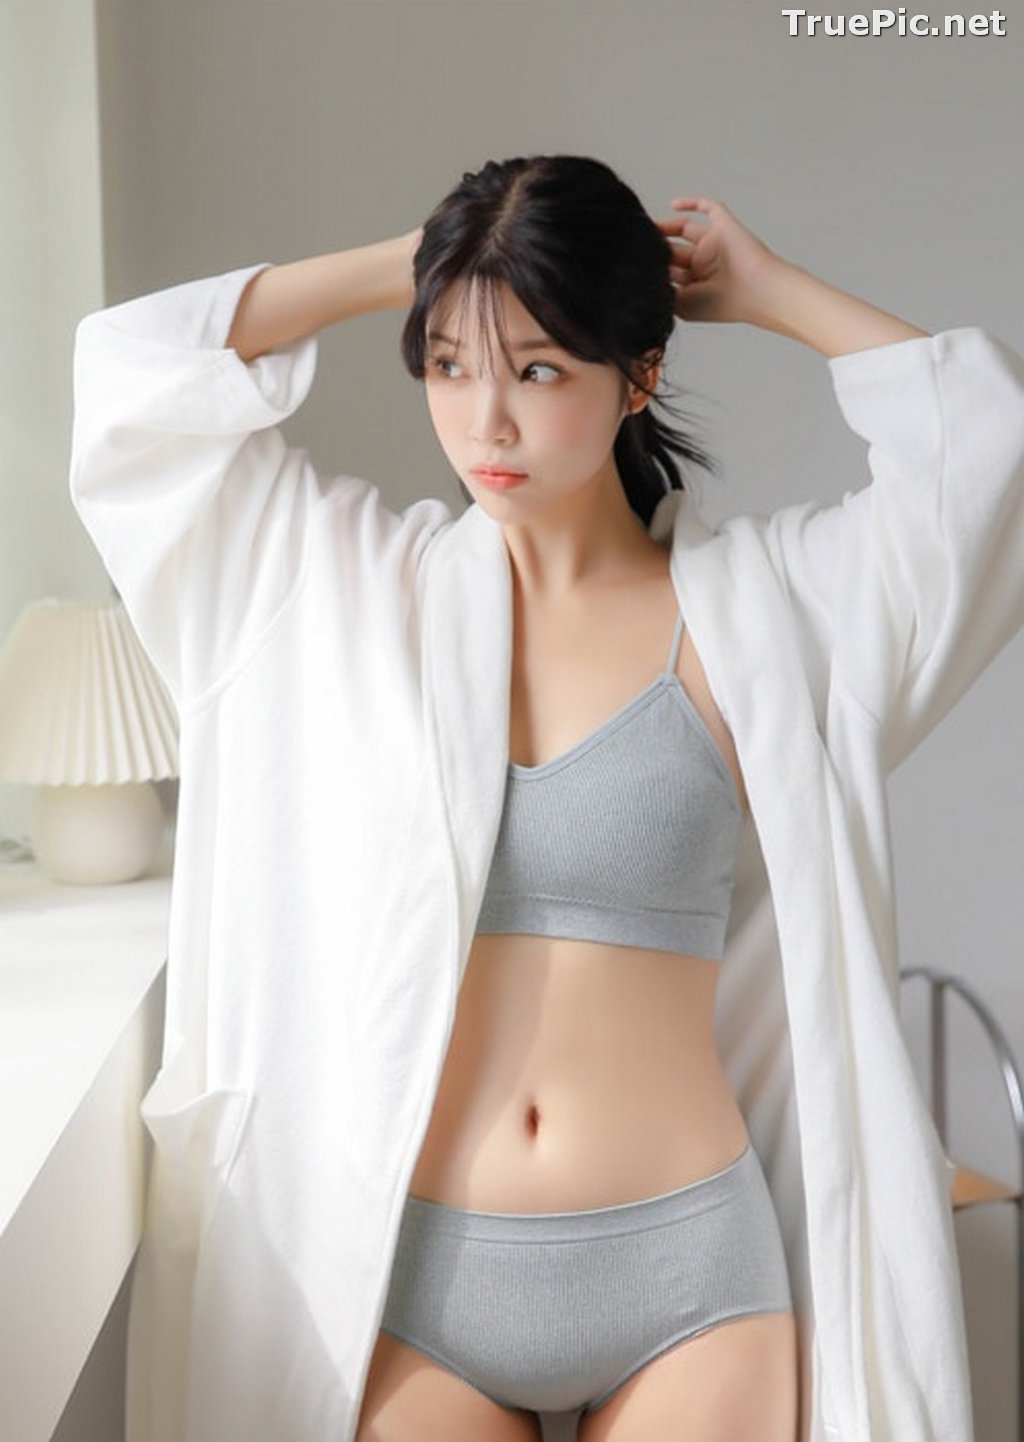 Image Korean Model - Cha Yoo Jin - Daily Tight Lingerie - TruePic.net (21 pictures) - Picture-11